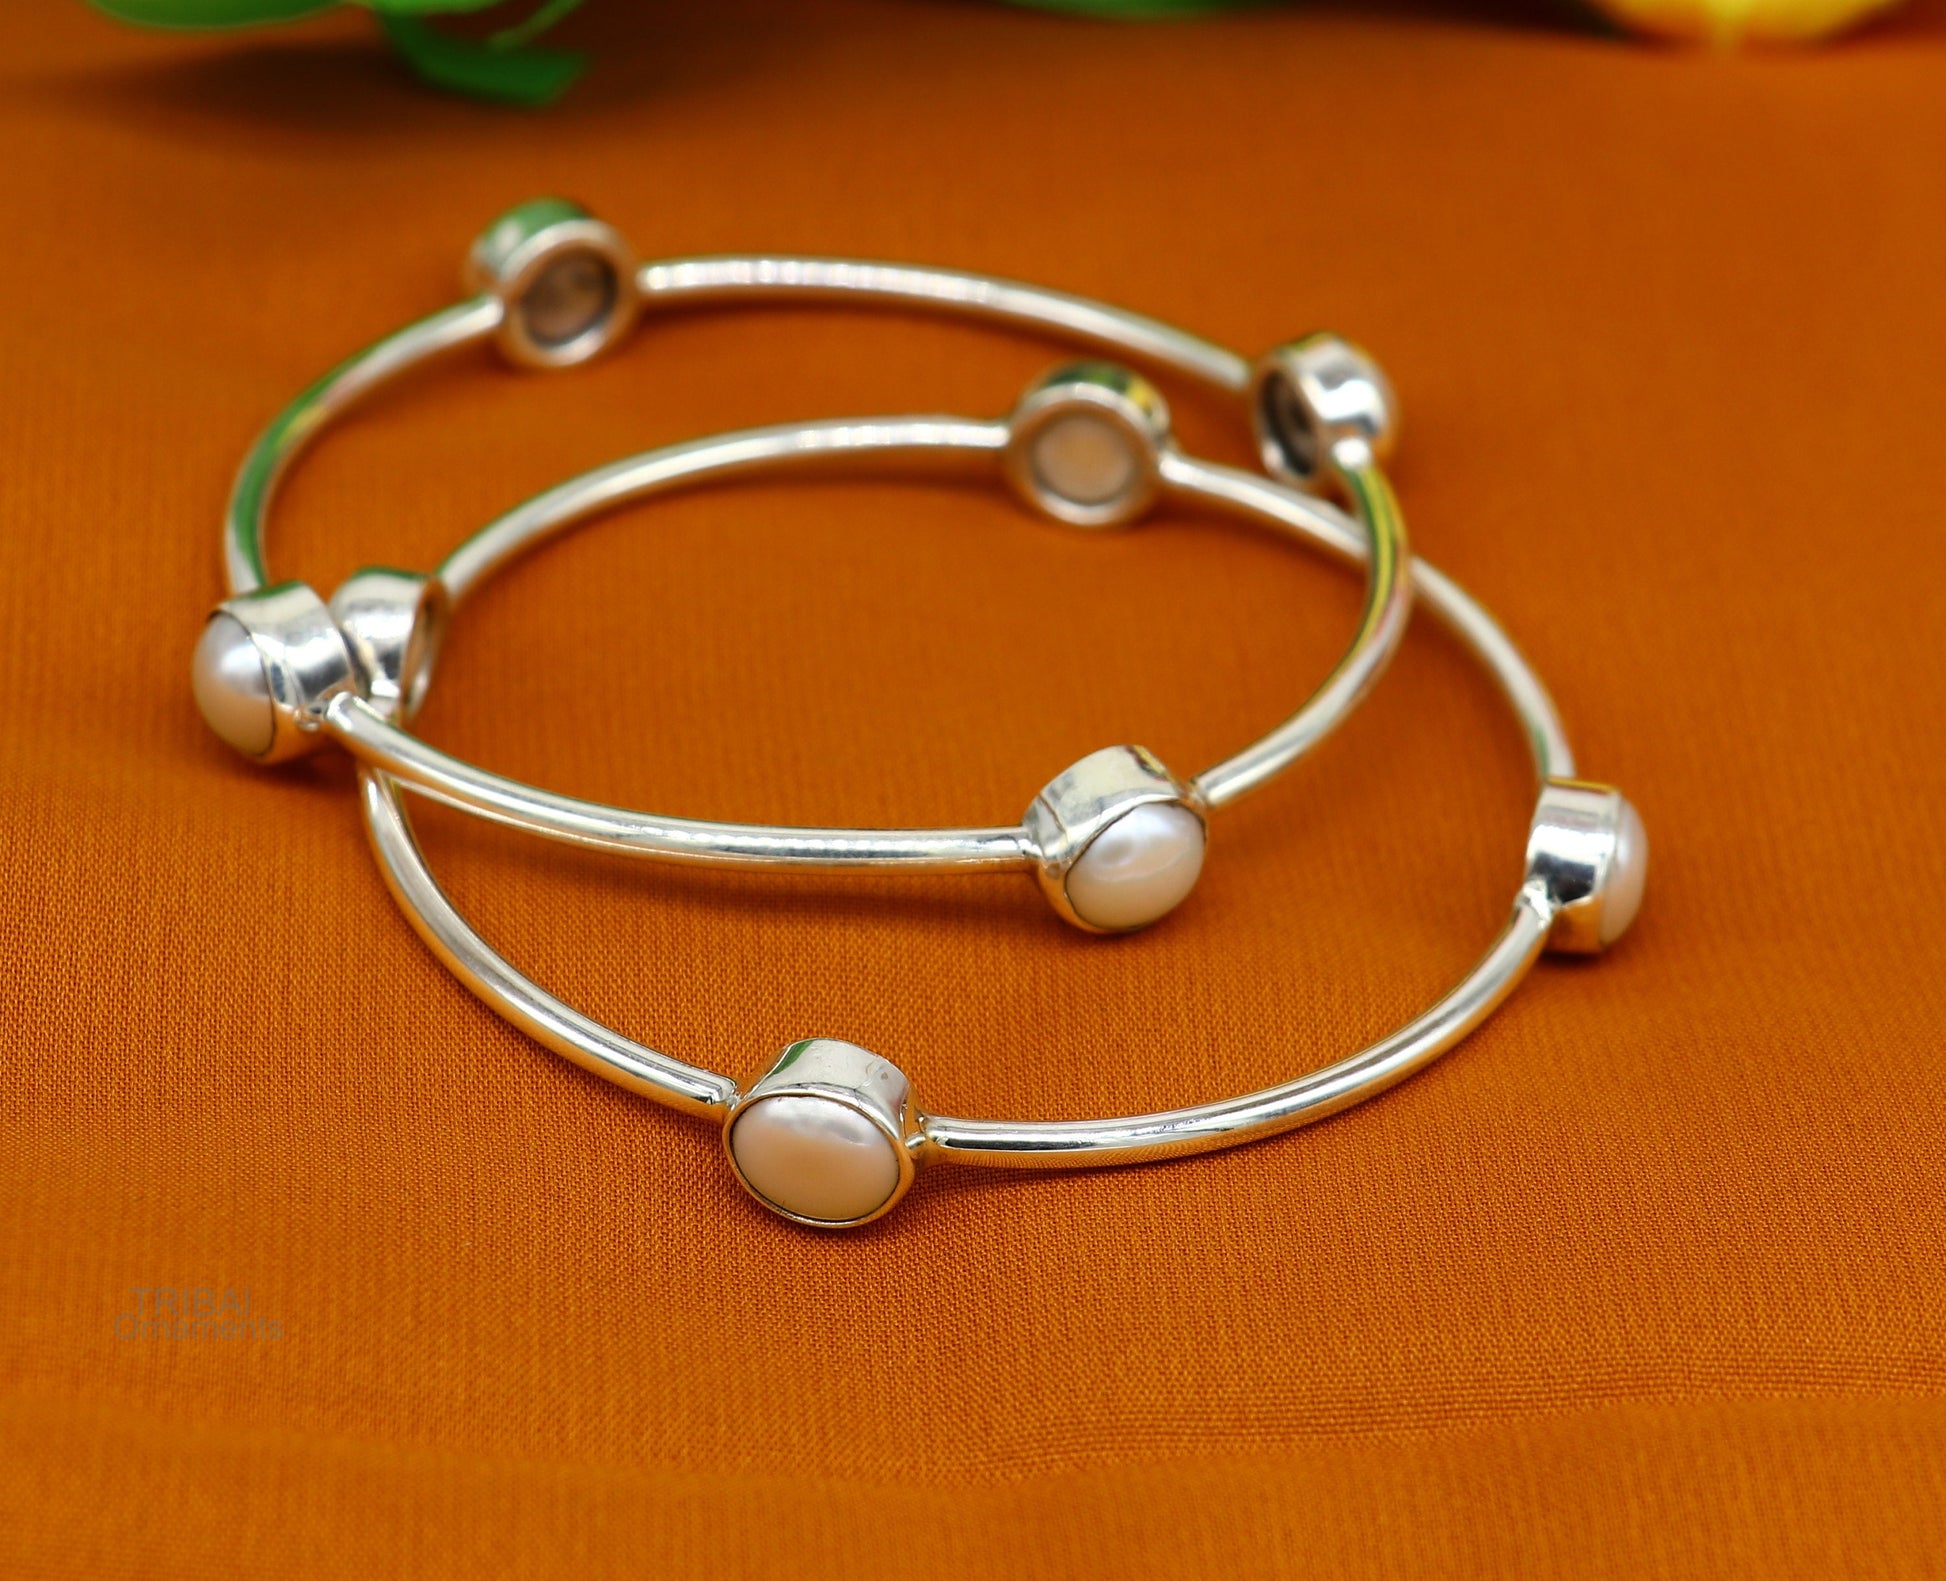 925 sterling silver plain bangle bracelet with gorgeous natural pearl stone floral design bangles, best brides or girl's jewelry ba128 - TRIBAL ORNAMENTS